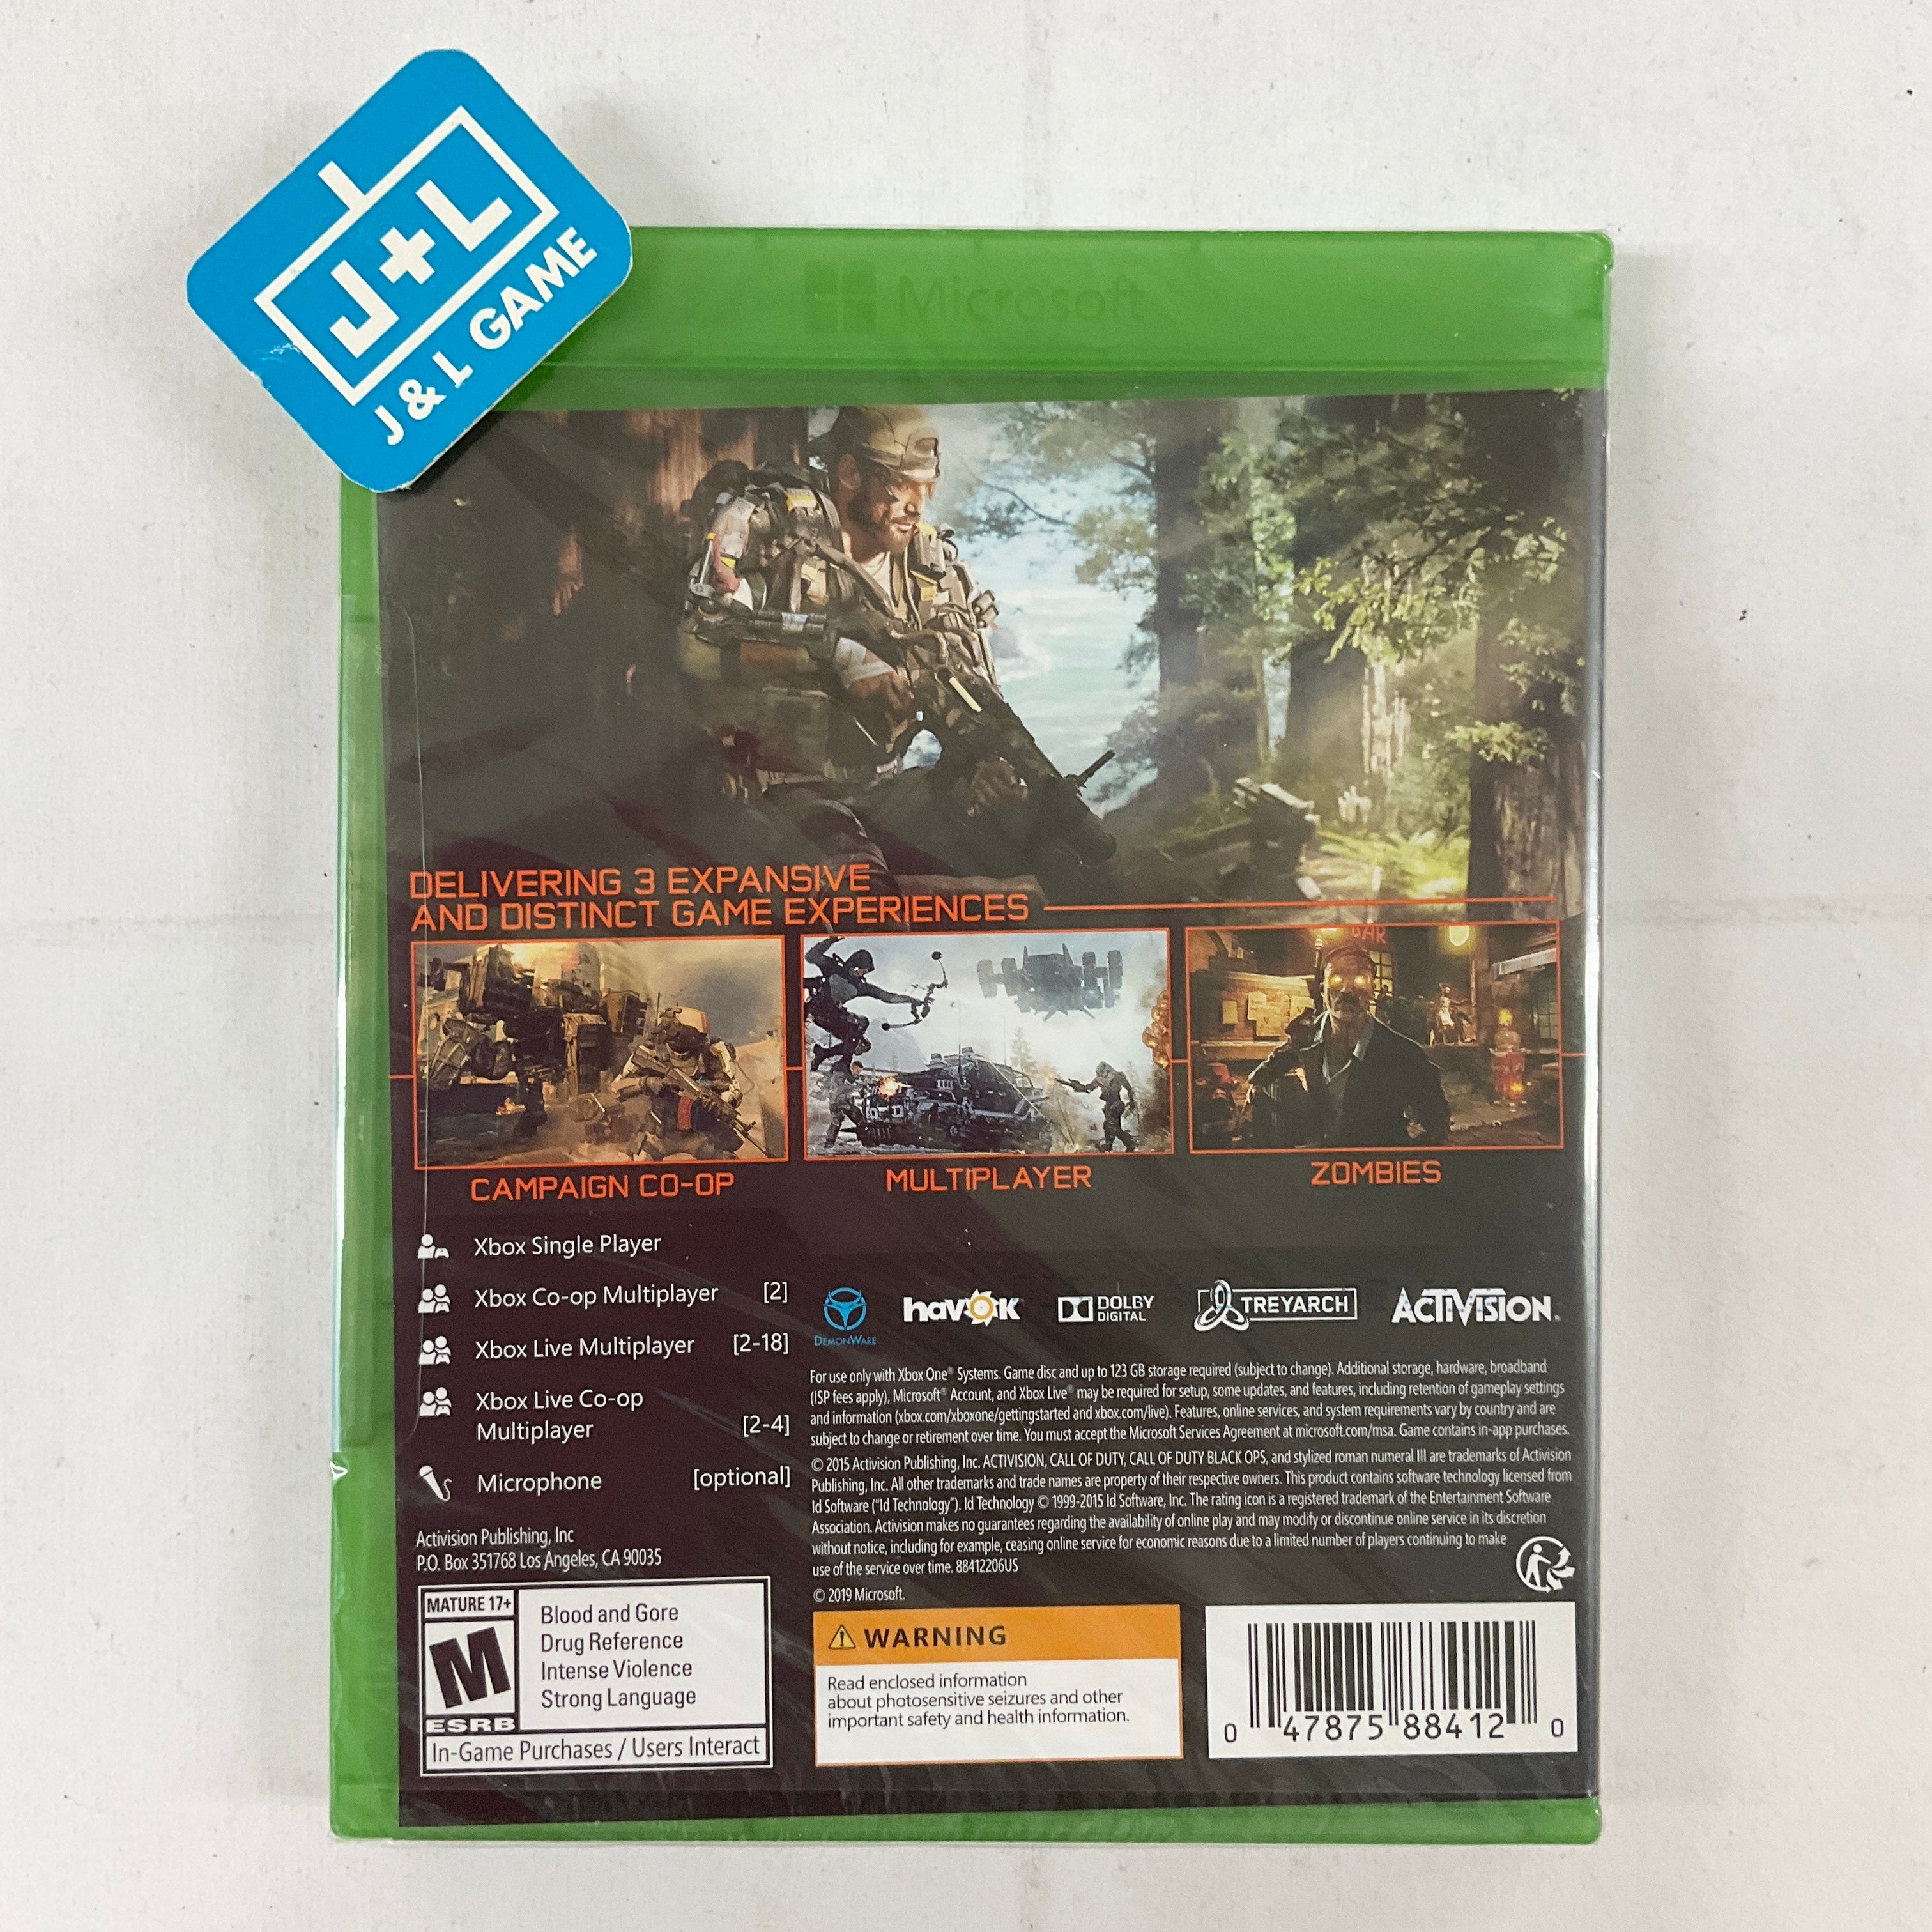 Call of Duty: Black Ops III - (XB1) Xbox One Video Games Activision   